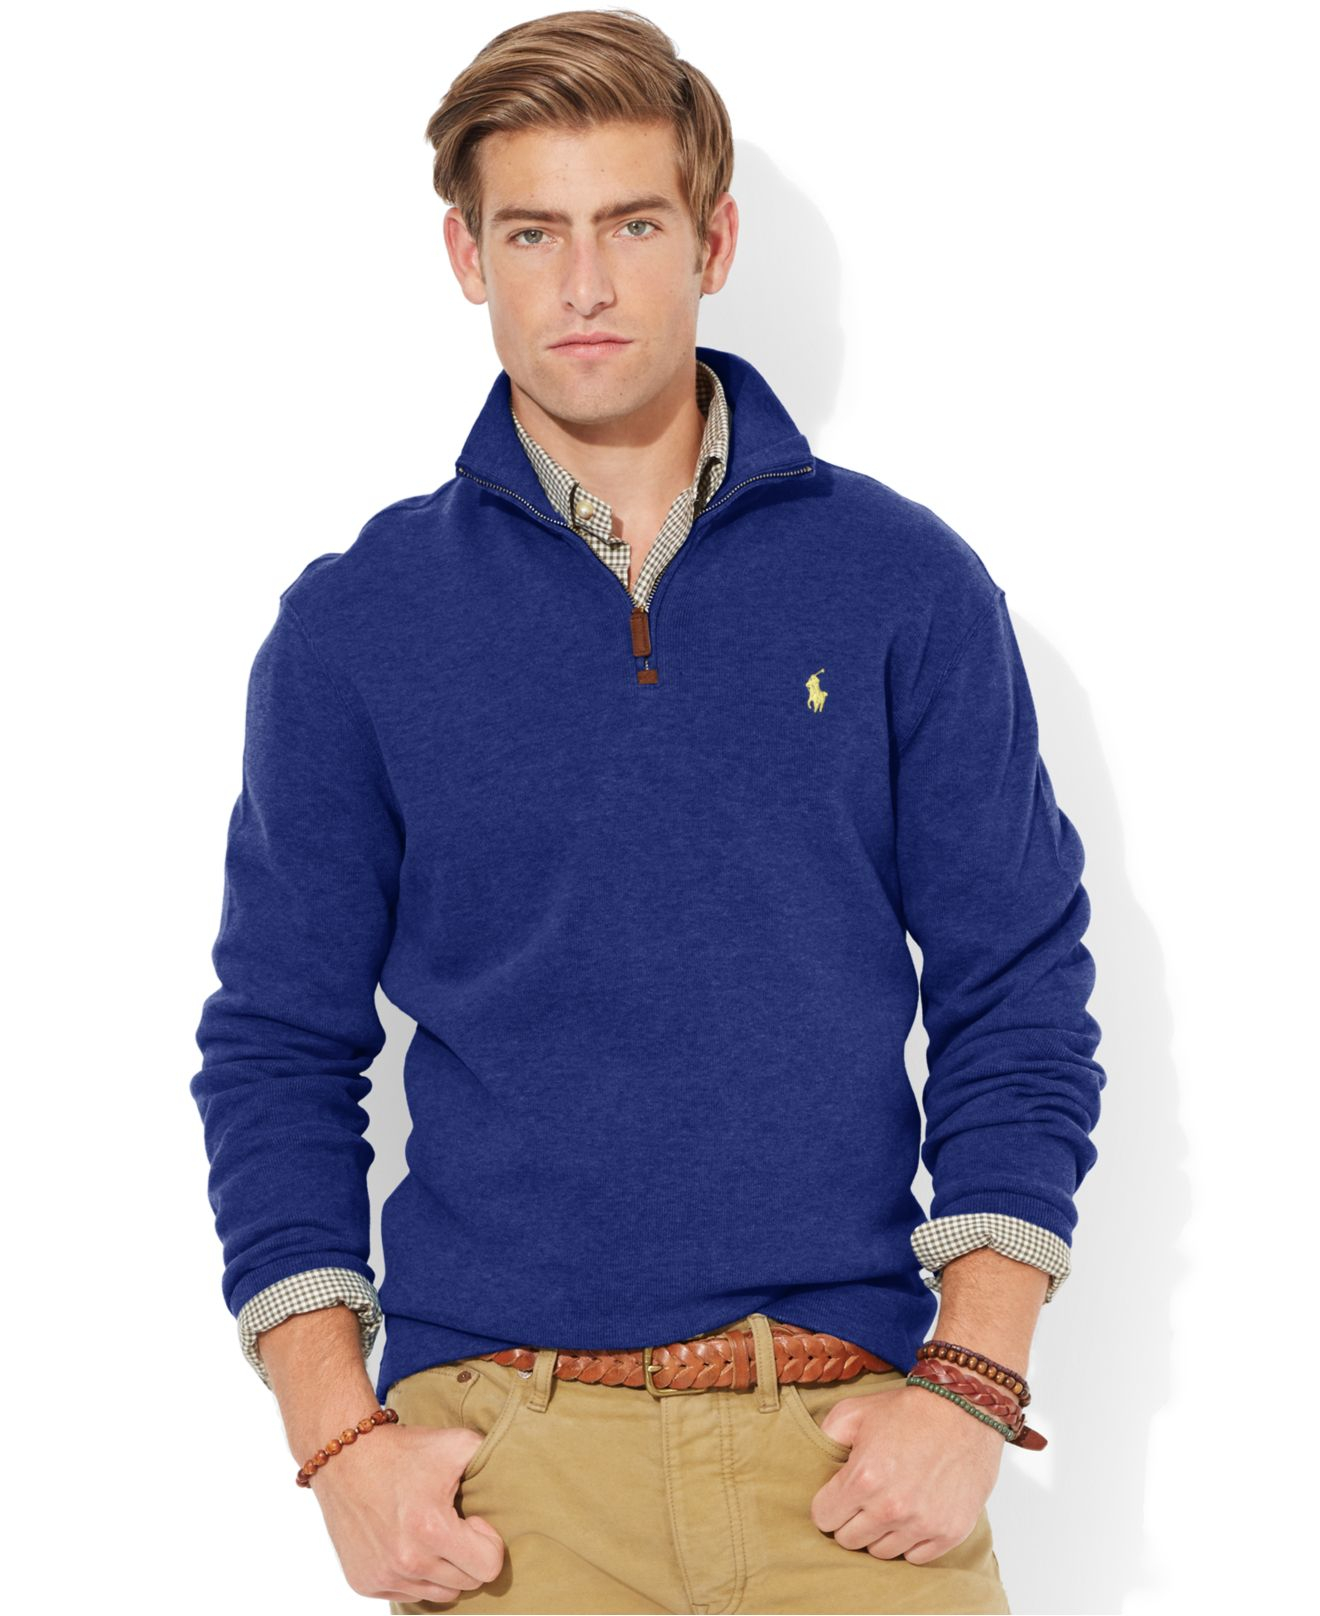 Lyst - Polo Ralph Lauren French-Rib Half-Zip Pullover Sweater in Blue ...